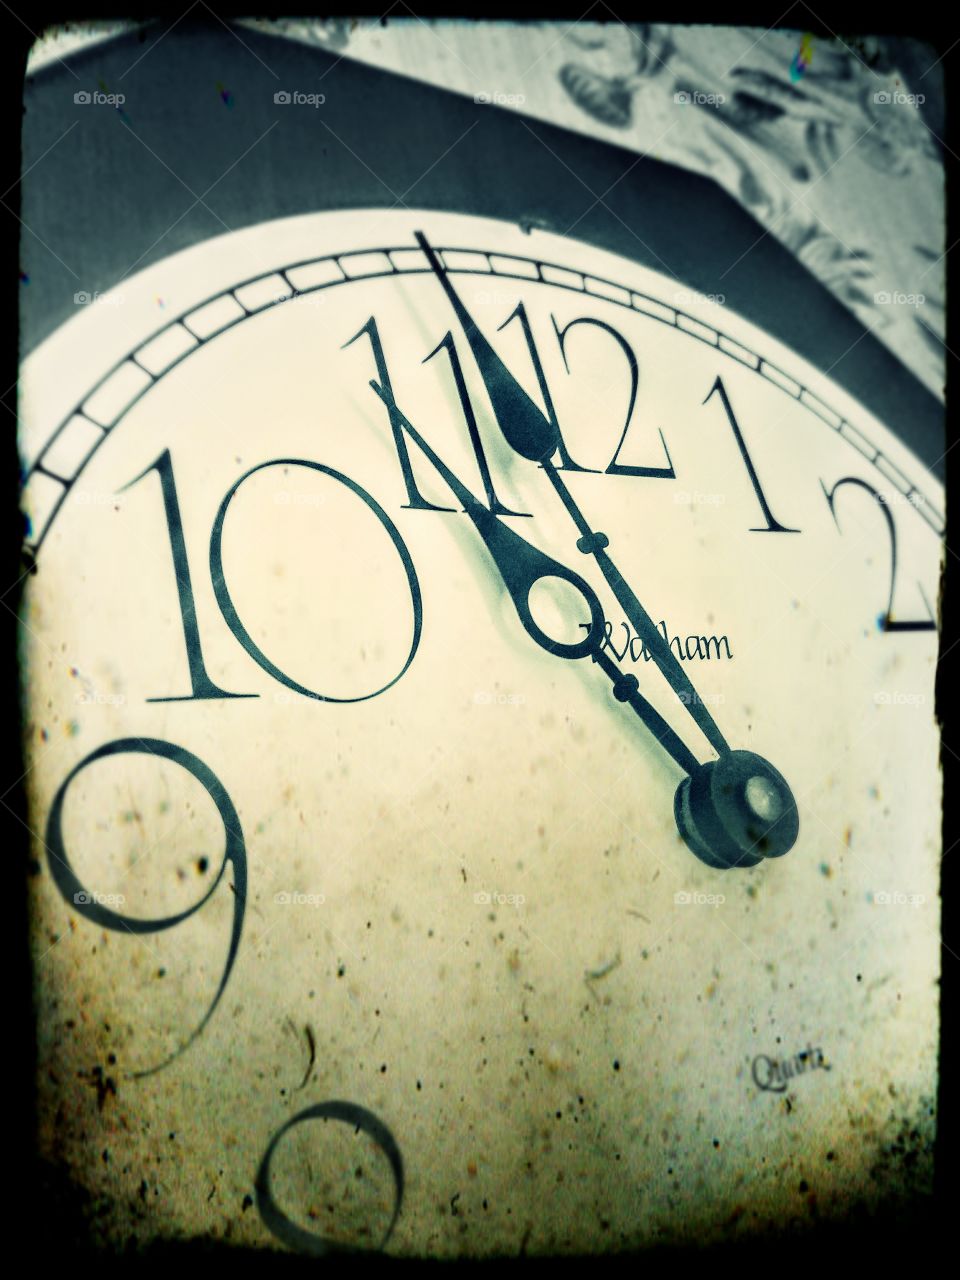 Vintage style picture of old clock striking 12 o'clock